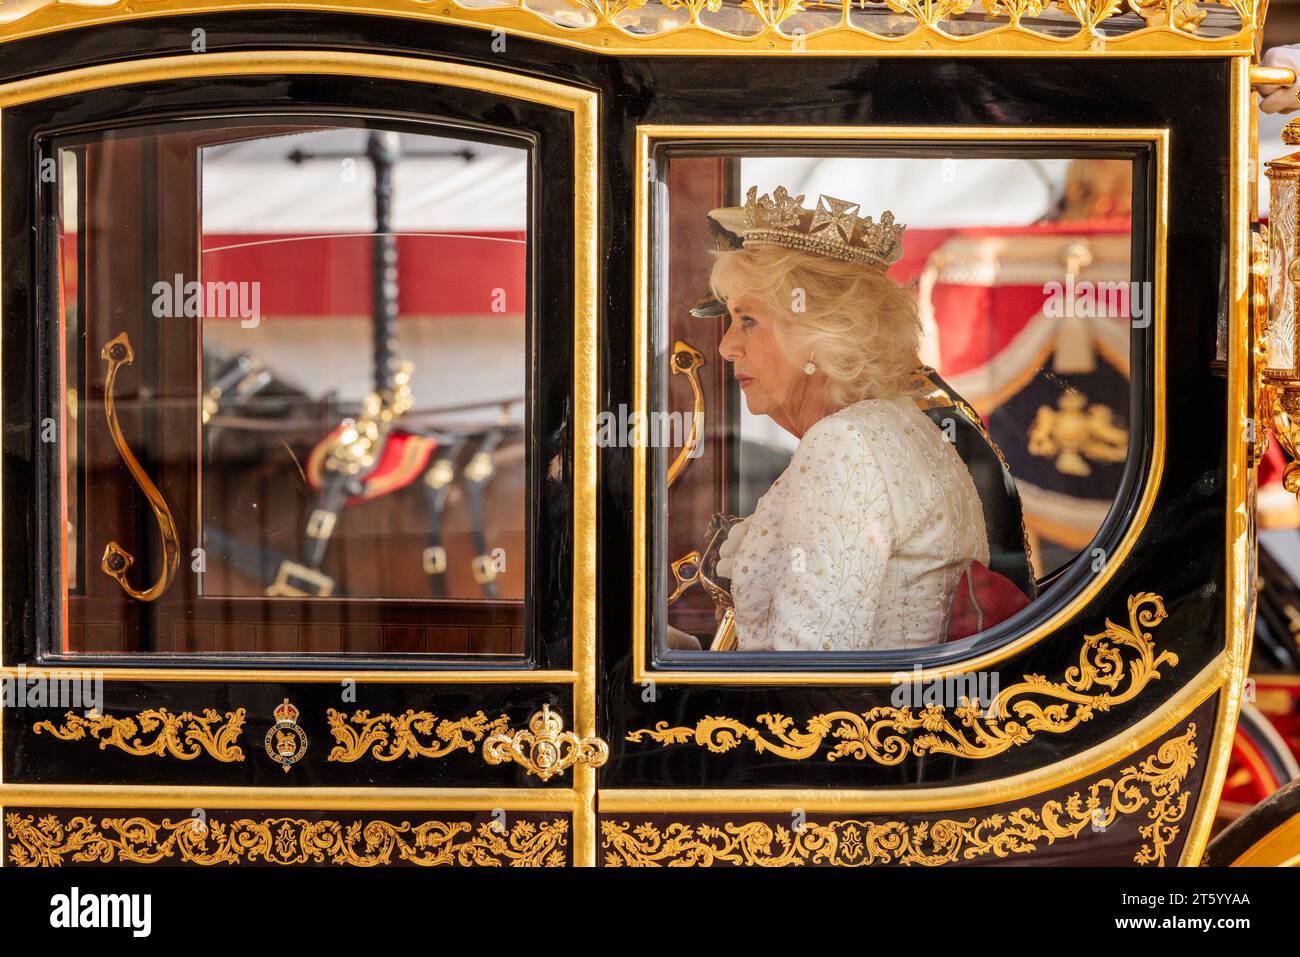 Westminster, London, UK. 7th November 2023. Her Majesty Queen Camilla, wearing the George IV State Diadem, leaving the Palace of Westminster following the State opening of Parliament. It was His Majesty's first King's Speech since becoming Monarch. Photo by Amanda Rose/Alamy Live News Stock Photo